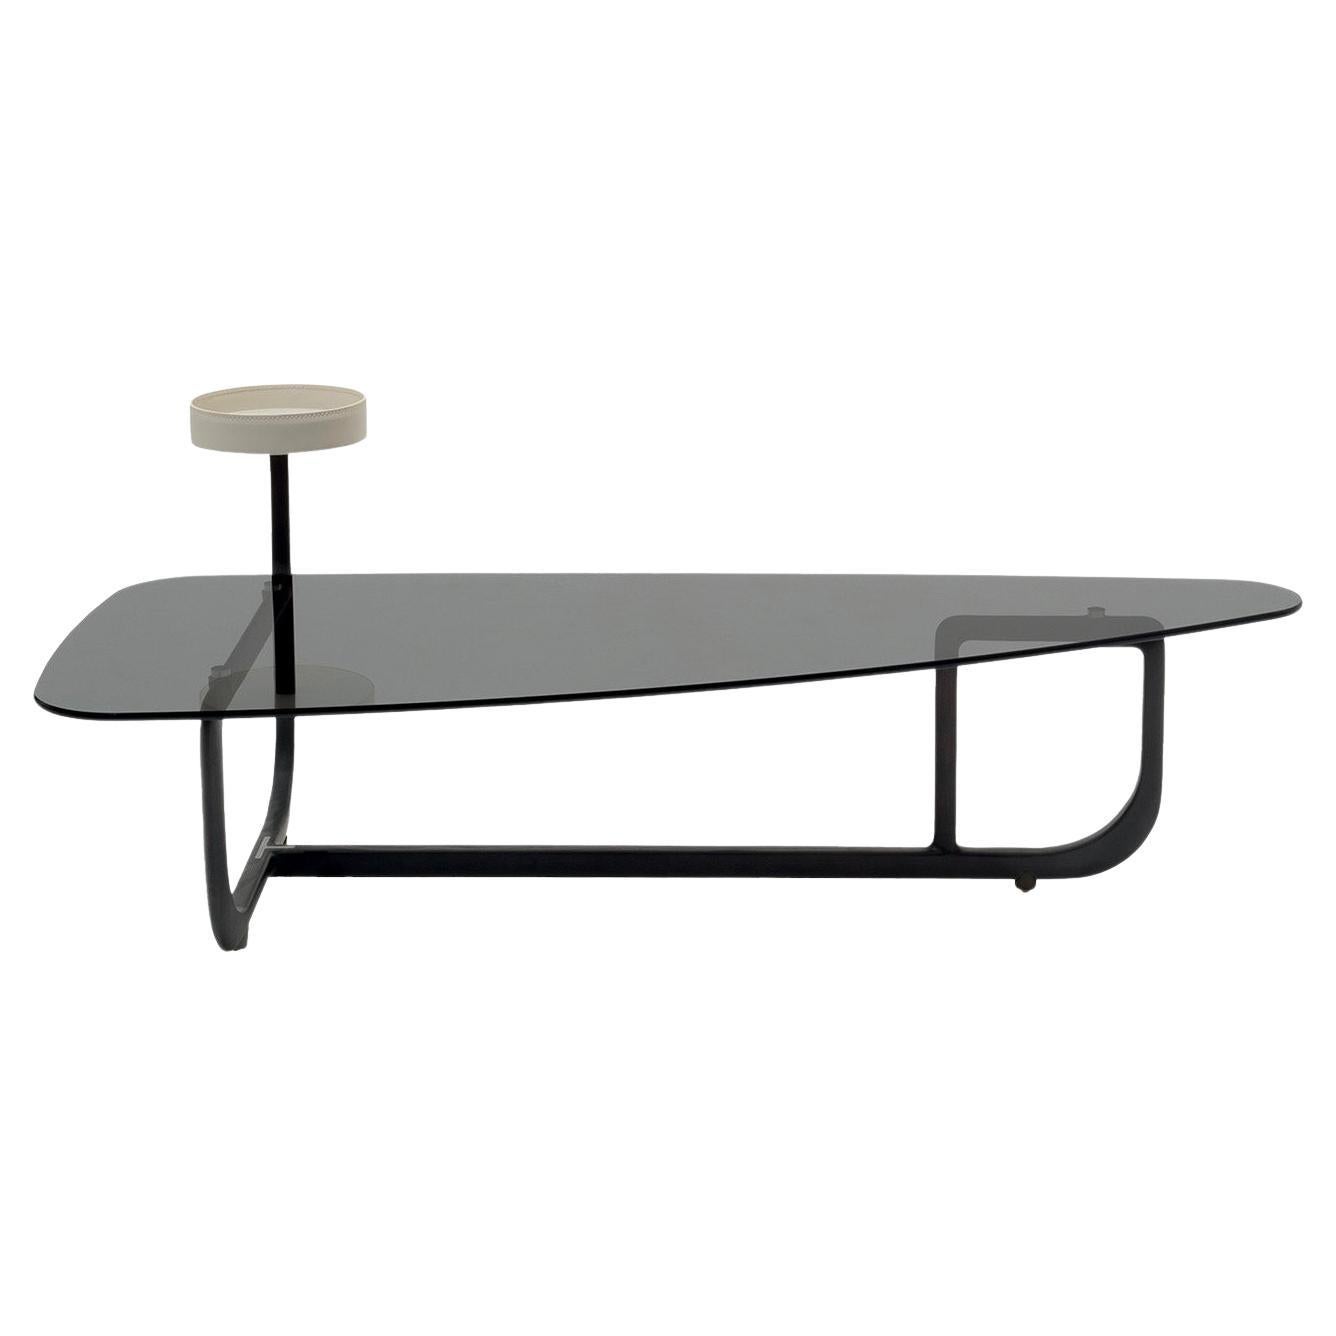 Amiral Coffee Table For Sale